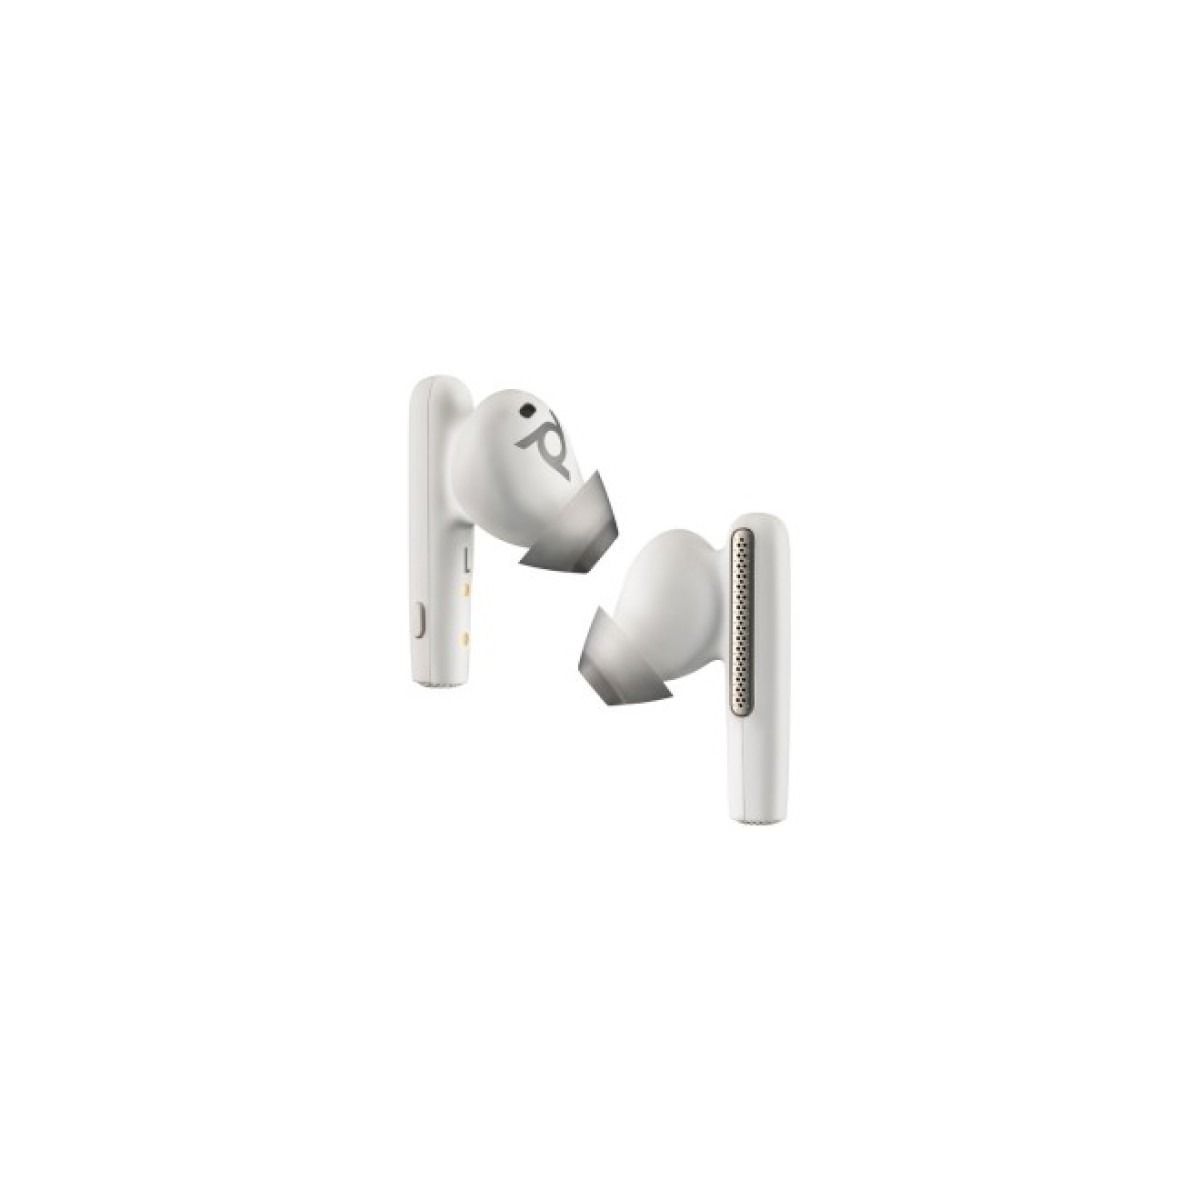 Навушники Poly Voyager Free 60 Earbuds + BT700C + BCHC White (7Y8L4AA) 256_256.jpg